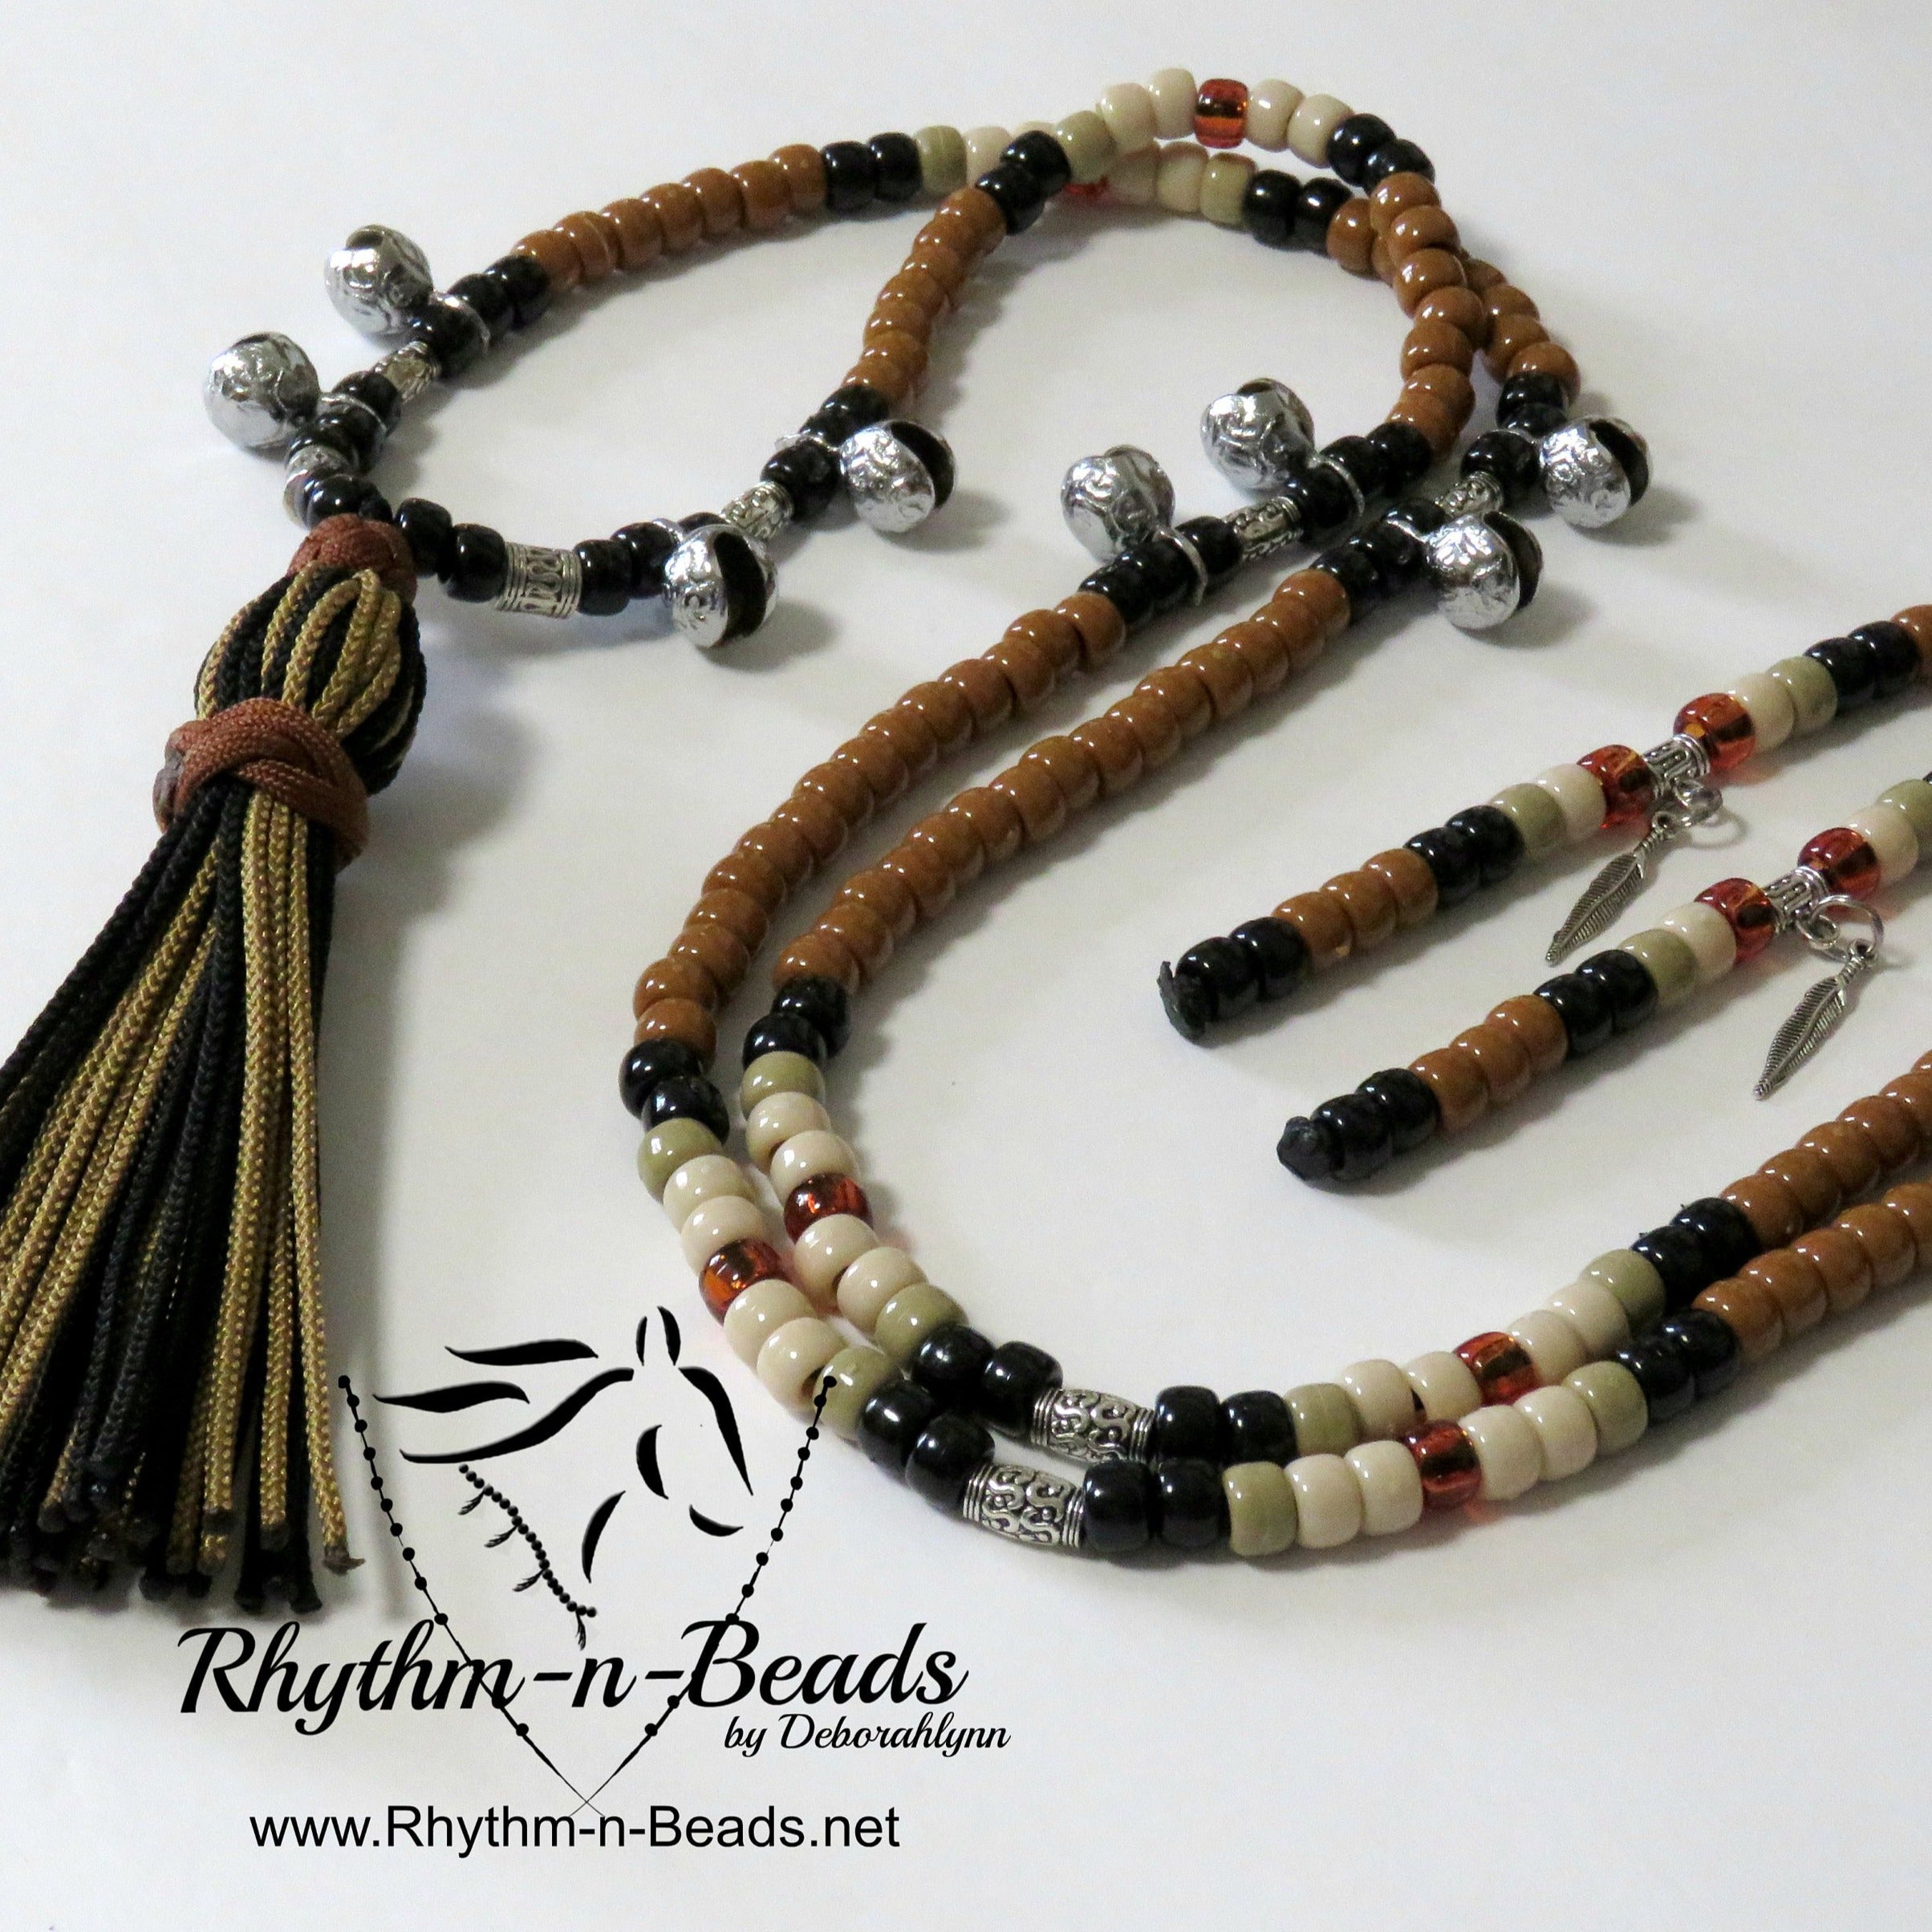 Trail Riding Tack, SPICED MOCHA with Tassel, Trail Beads for Horses,Horse Necklace, Speed Beads, Horse tack,Trail Bells, Horse Bells